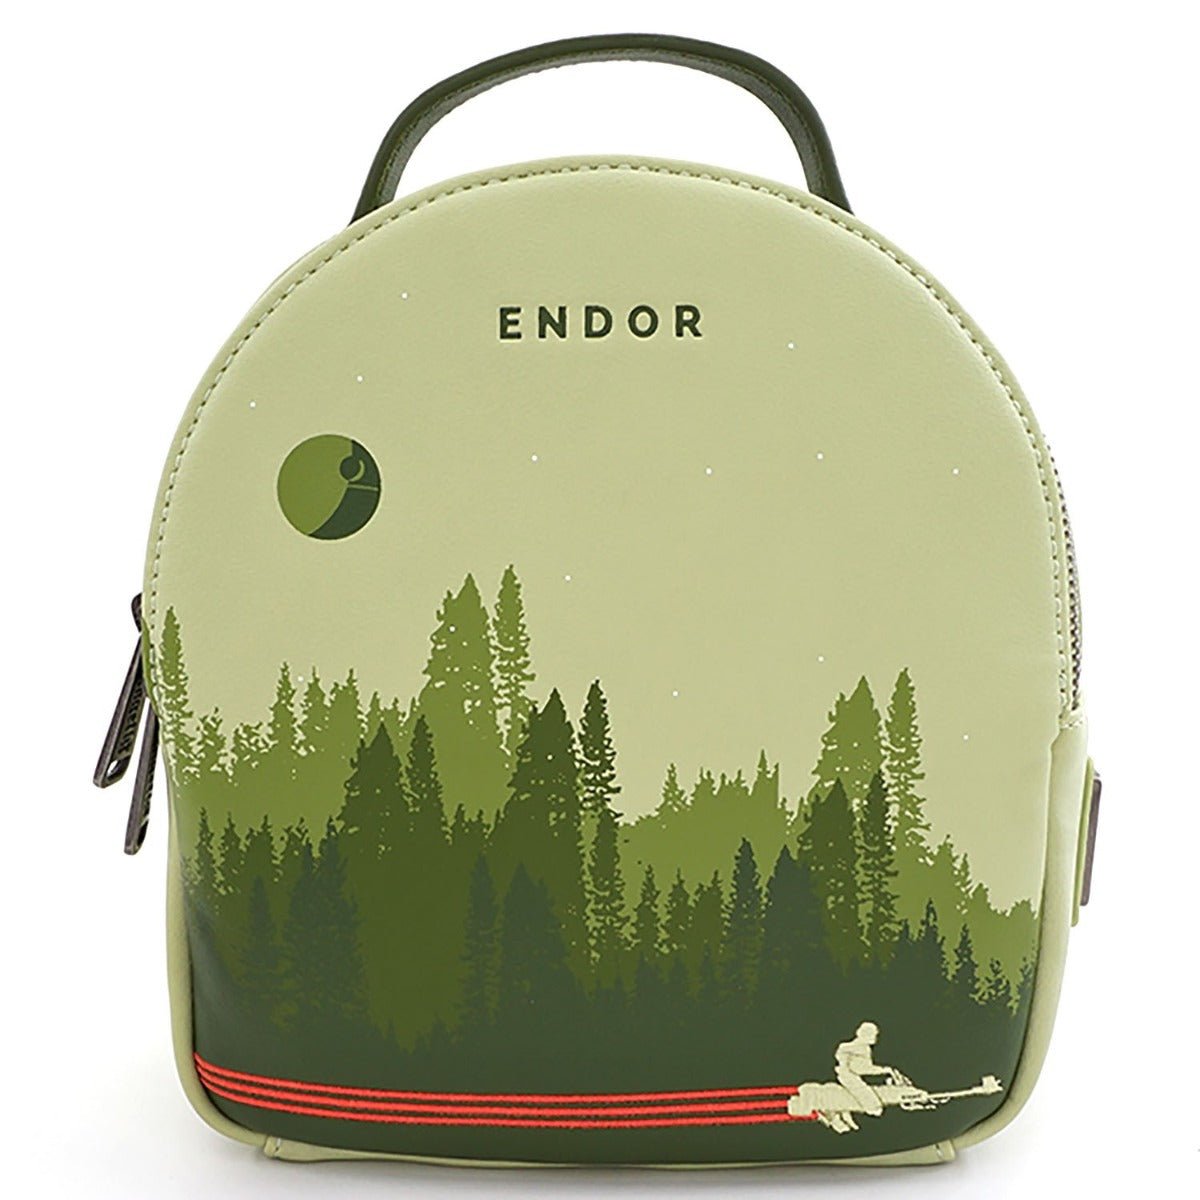 Loungefly x Star Wars Endor Convertible Backpack Set - GeekCore